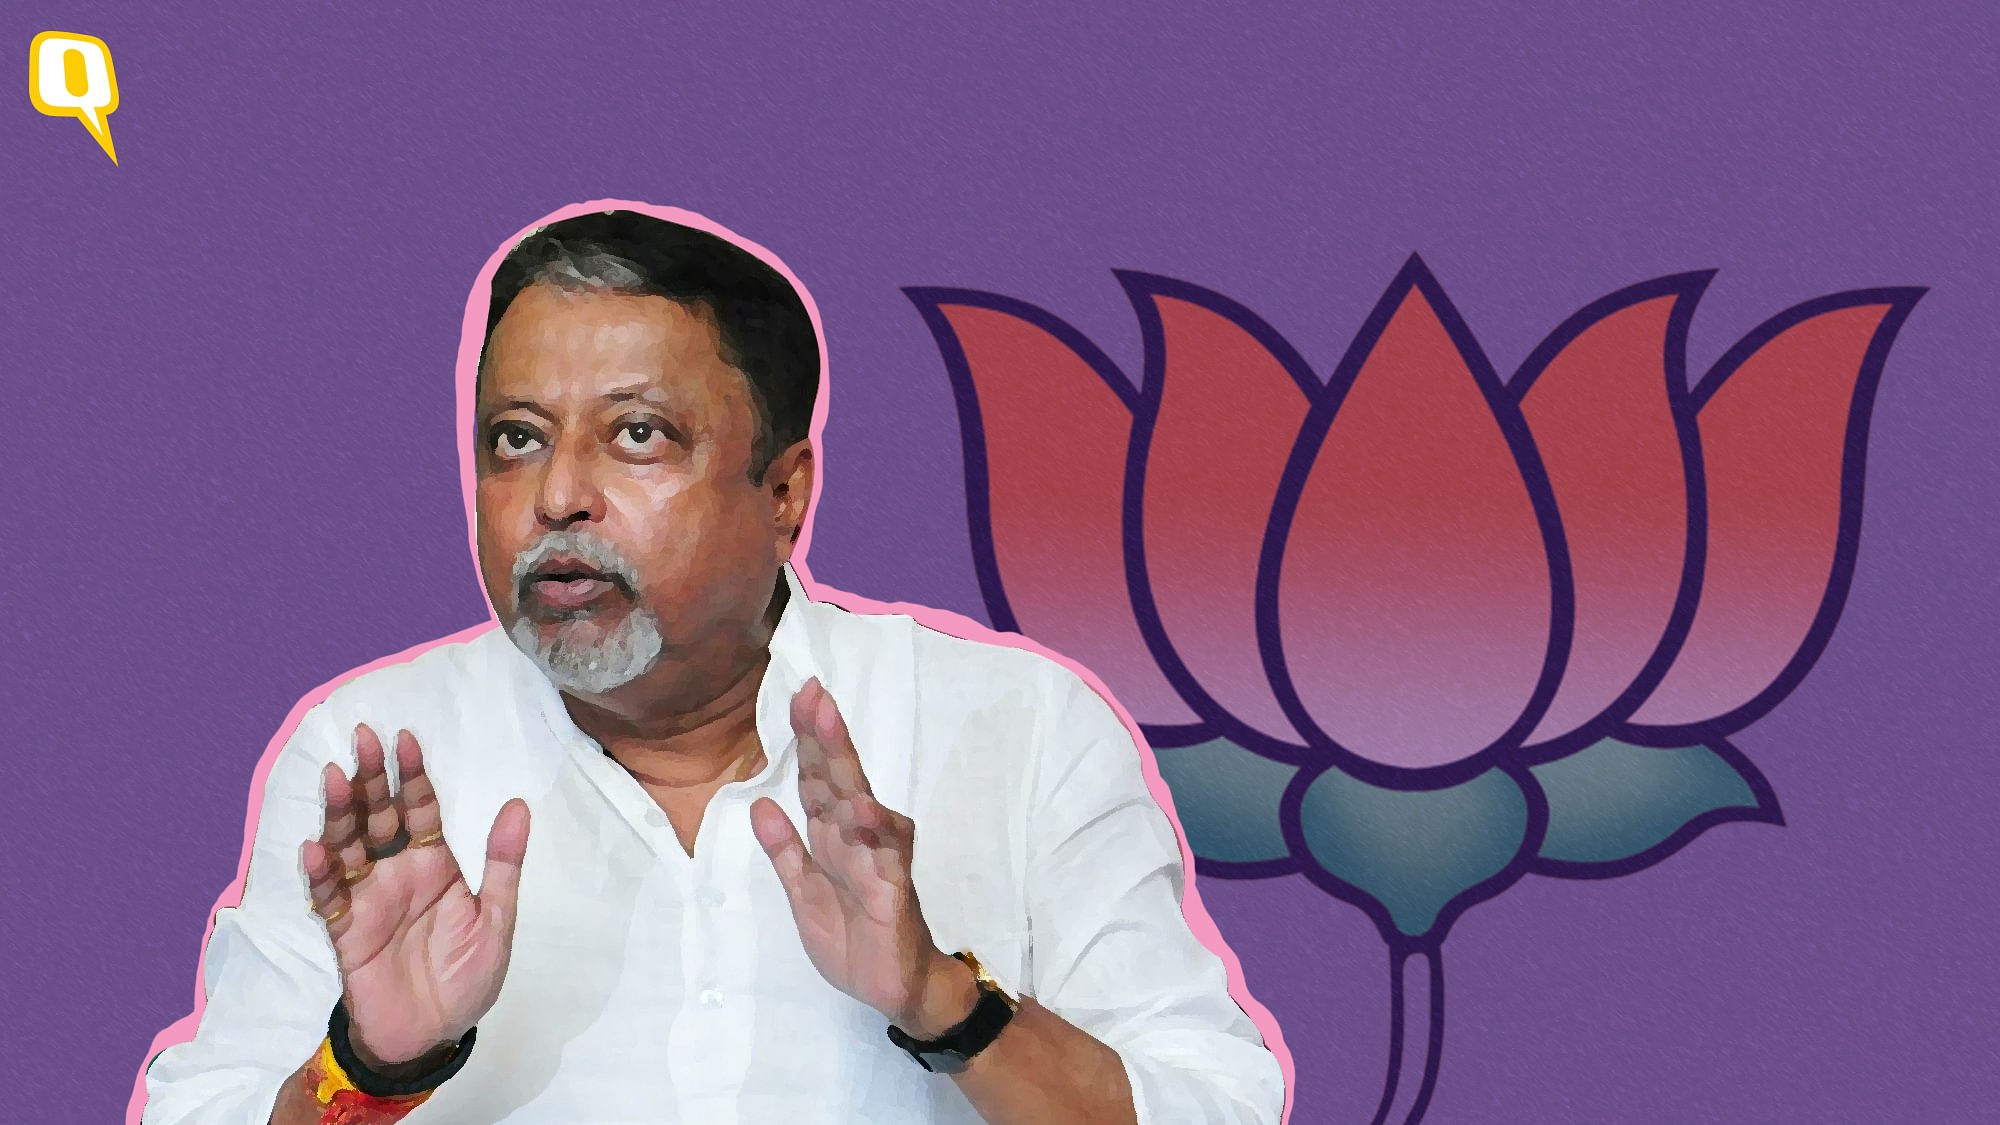 On Saturday, BJP leader Mukul Roy, who himself had jumped ship from the Trinamool Congress in late 2017, made a bold claim.